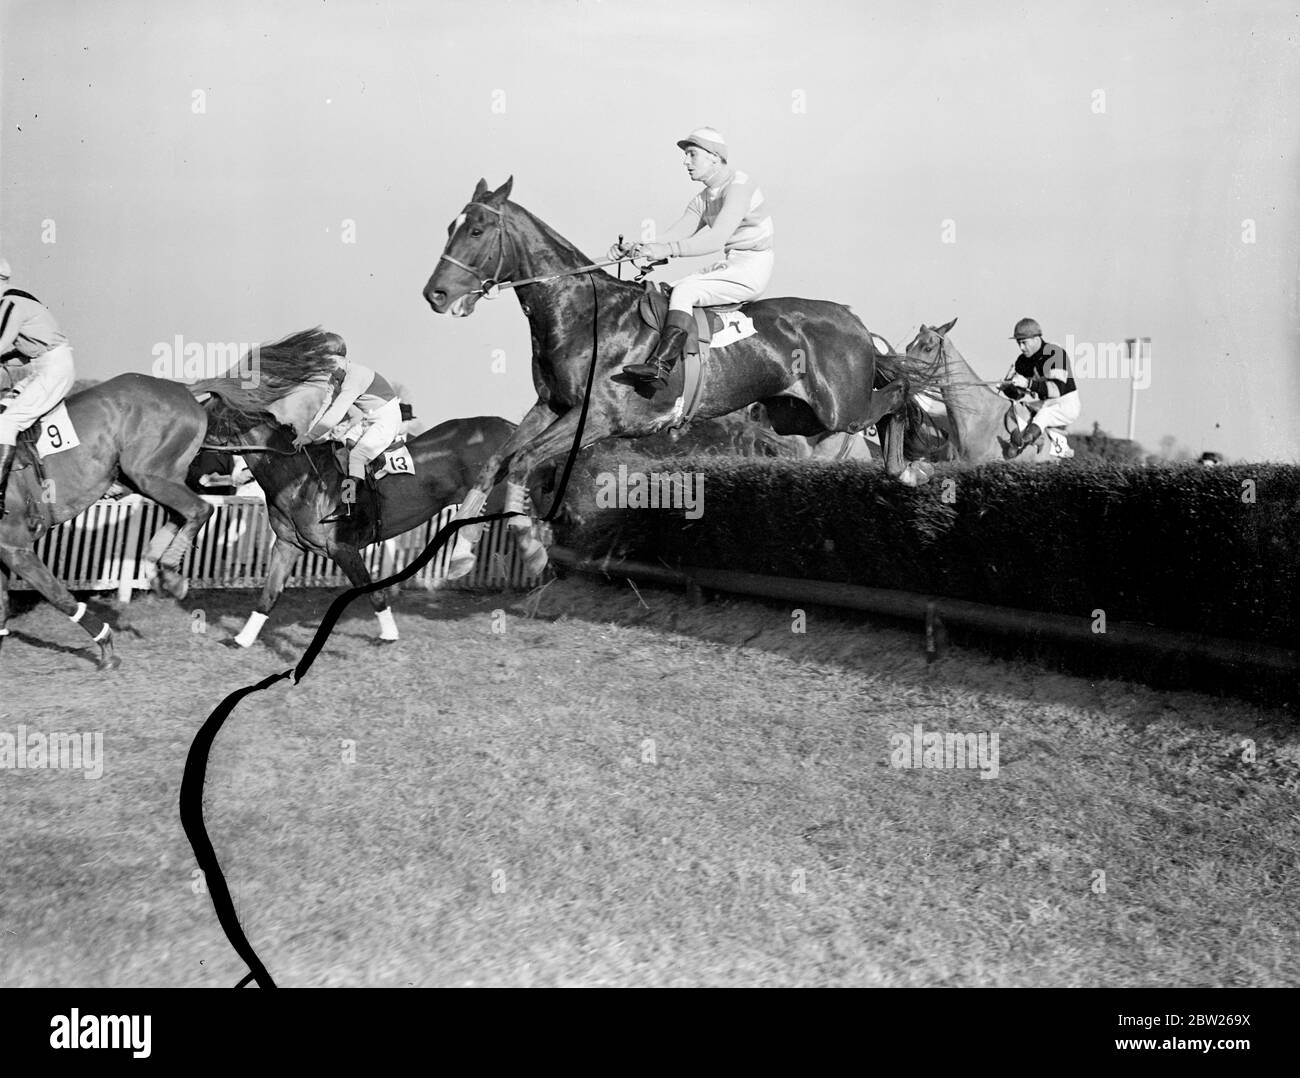 Grand National candidate runs at Kempton. Davy Jones, Lord Mildmay of Flete's horse which had a grand chance of winning the Grand National last year, but broke the rein and ran out at the last fence, is again entered for the Grand National on 25 March. Photo shows, Davy Jones, ridden by Mr A Mildmay, taking a jump in the Emblem Handicap Steeplechase at Kempton Park, near London. 2 March 1938 Stock Photo